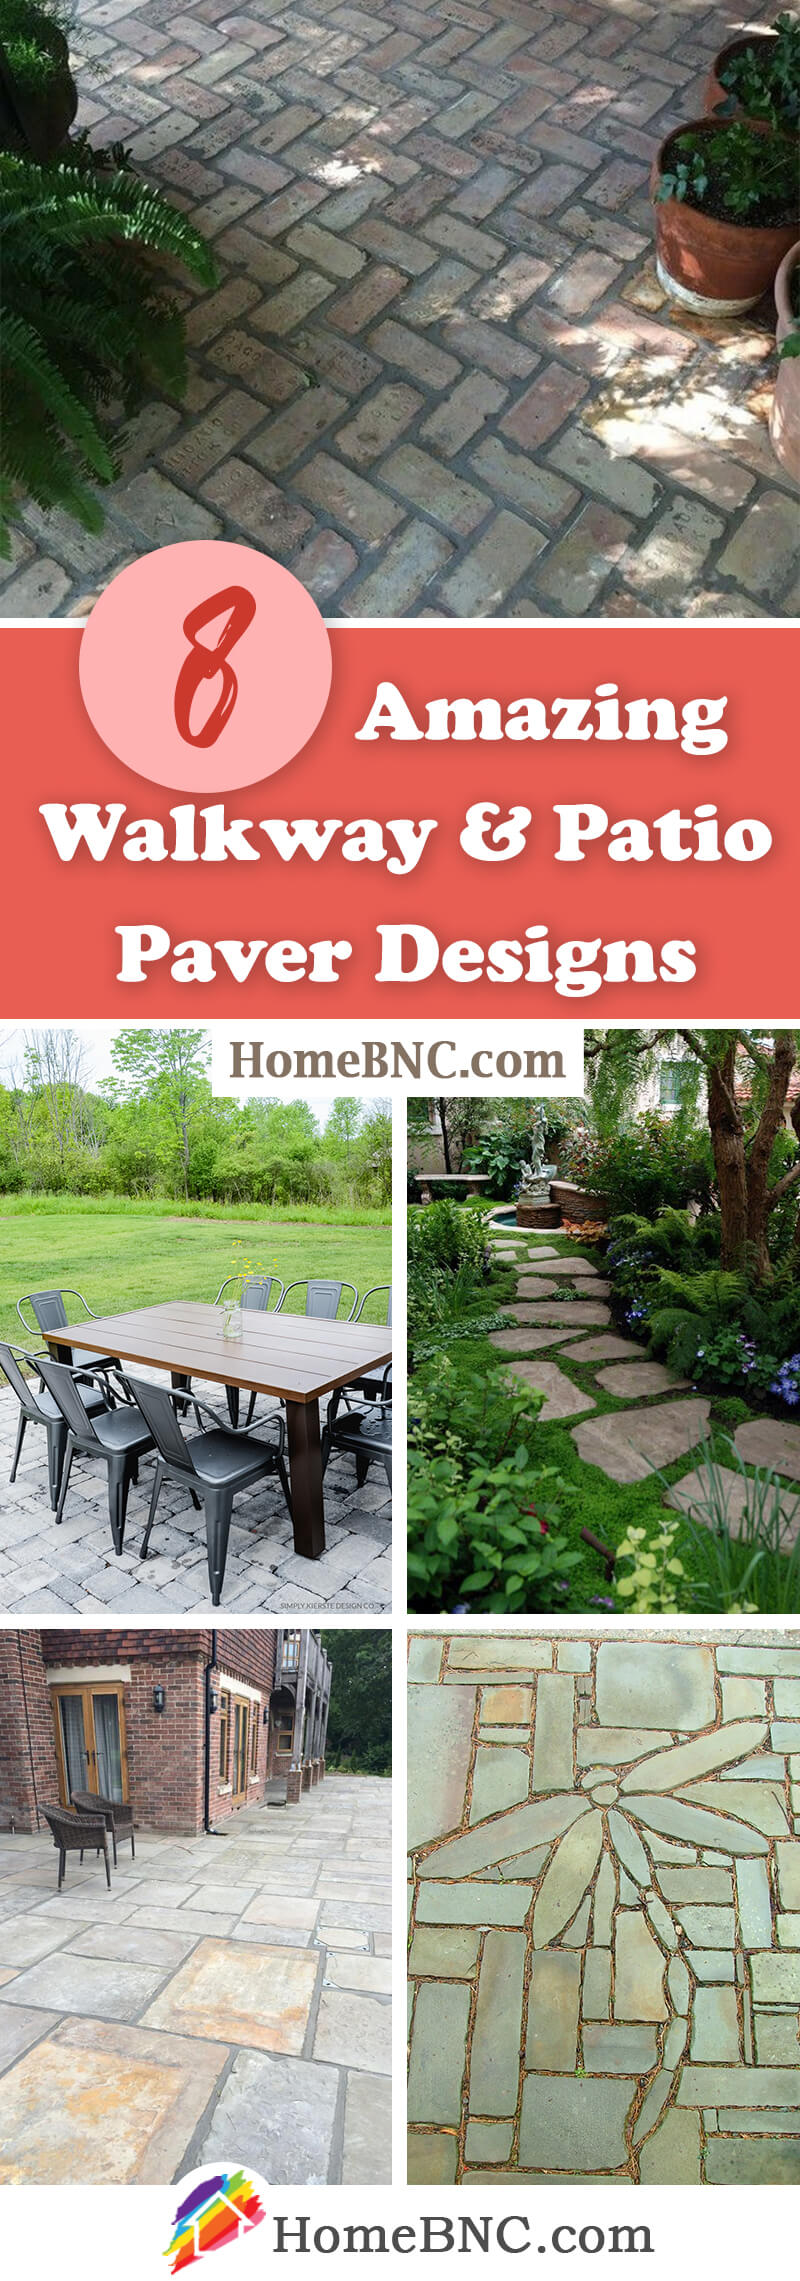 Walkway and Patio Paver Design Ideas